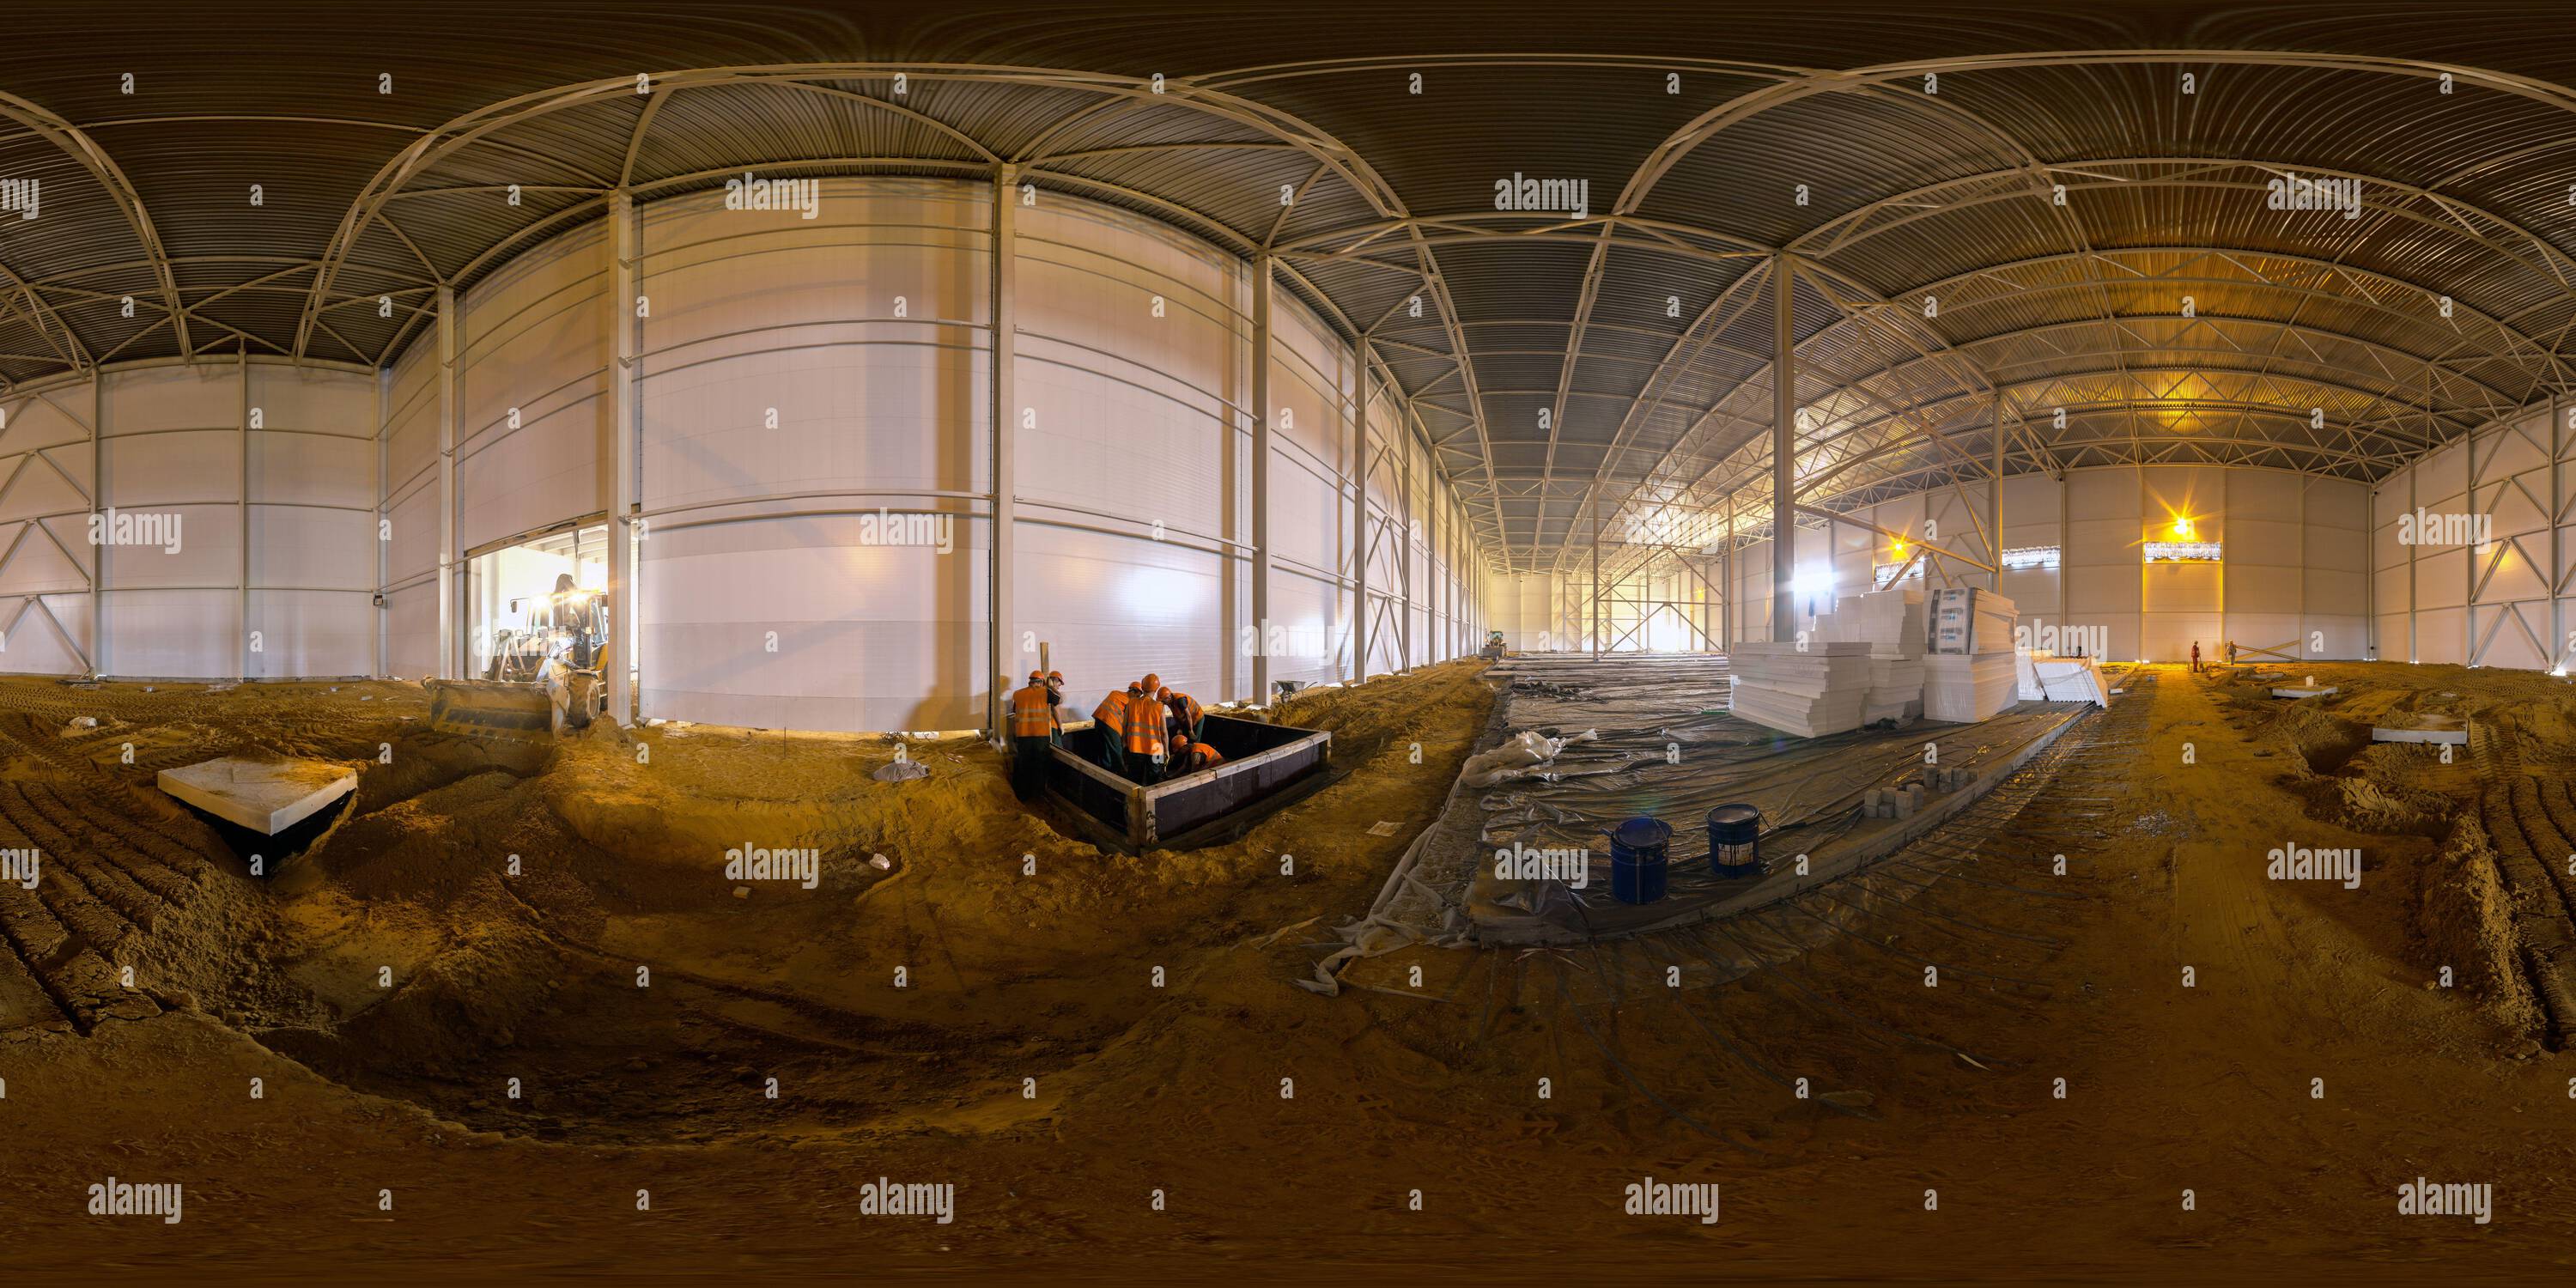 360 degree panoramic view of Seamless full spherical 360 degree panorama in equirectangular projection of indoor construction site in Tula, Russia - June 4, 2013